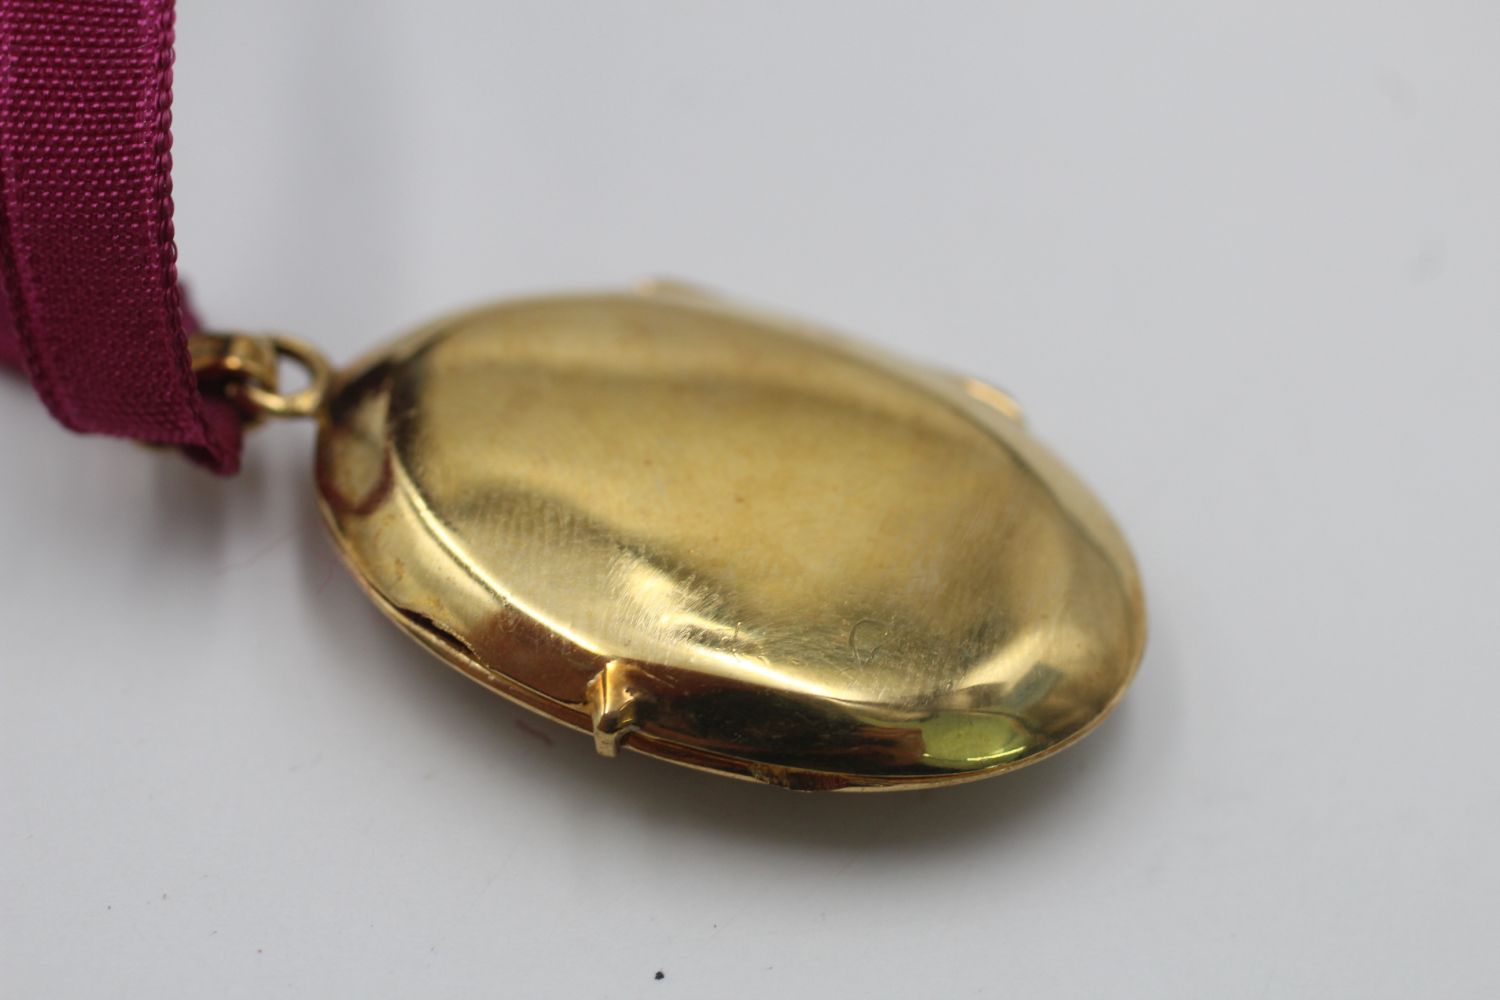 9ct gold vintage perfume diffuser locket necklace (7.6g) - Image 5 of 5